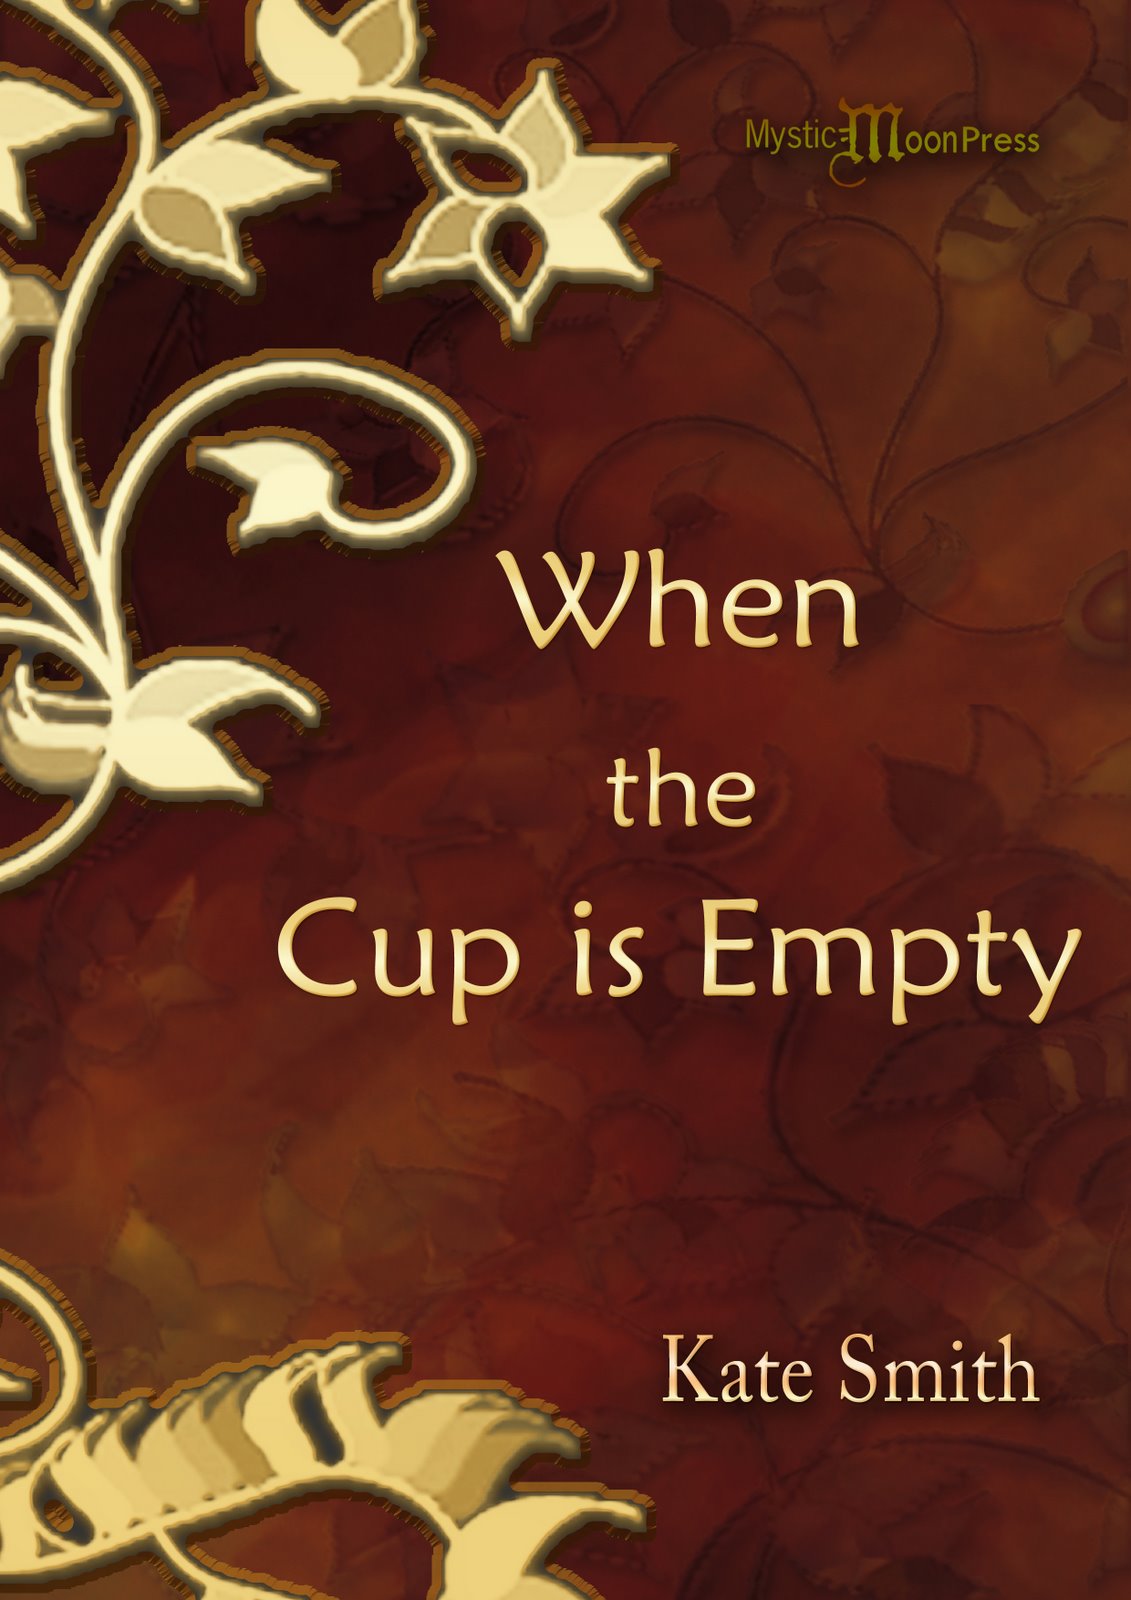 [When-Cup-Empty-Cover.jpg]